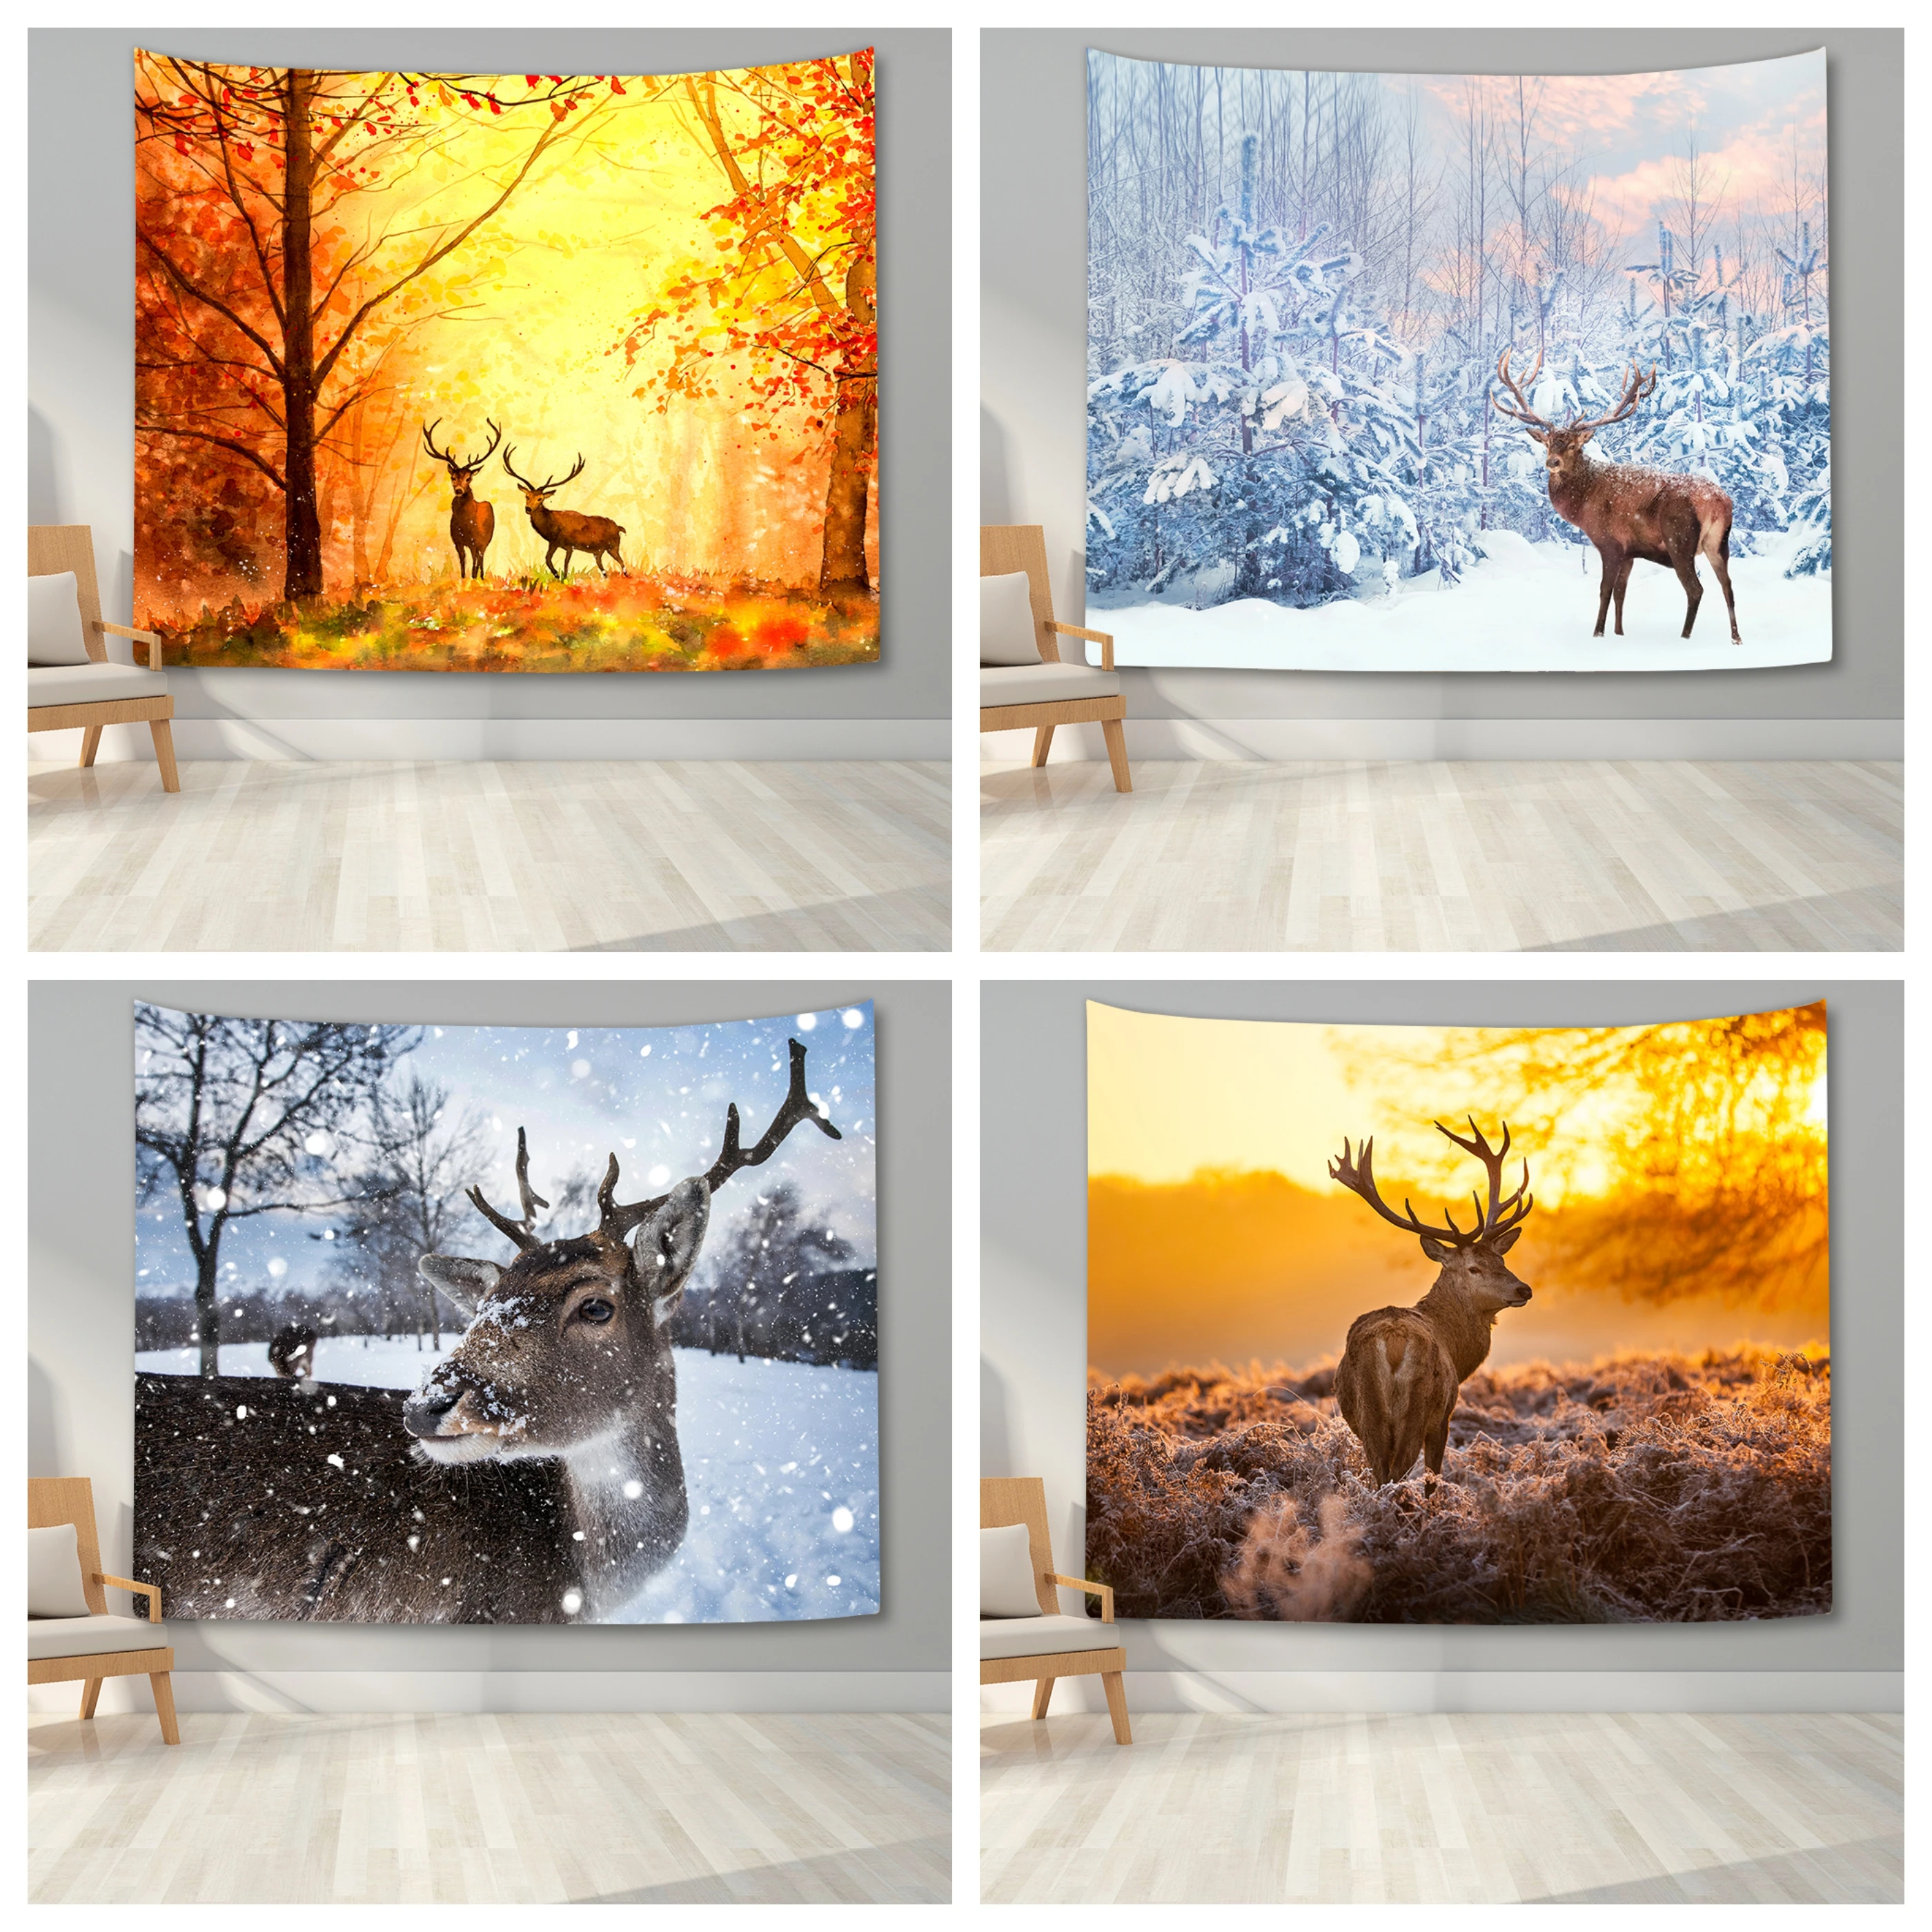 

Winter Snow Wonderland Tapestry Deer Tapestry Wall Decor Forest Tapestry Wall Hanging for Bedroom Living Room Dorm Home Decor